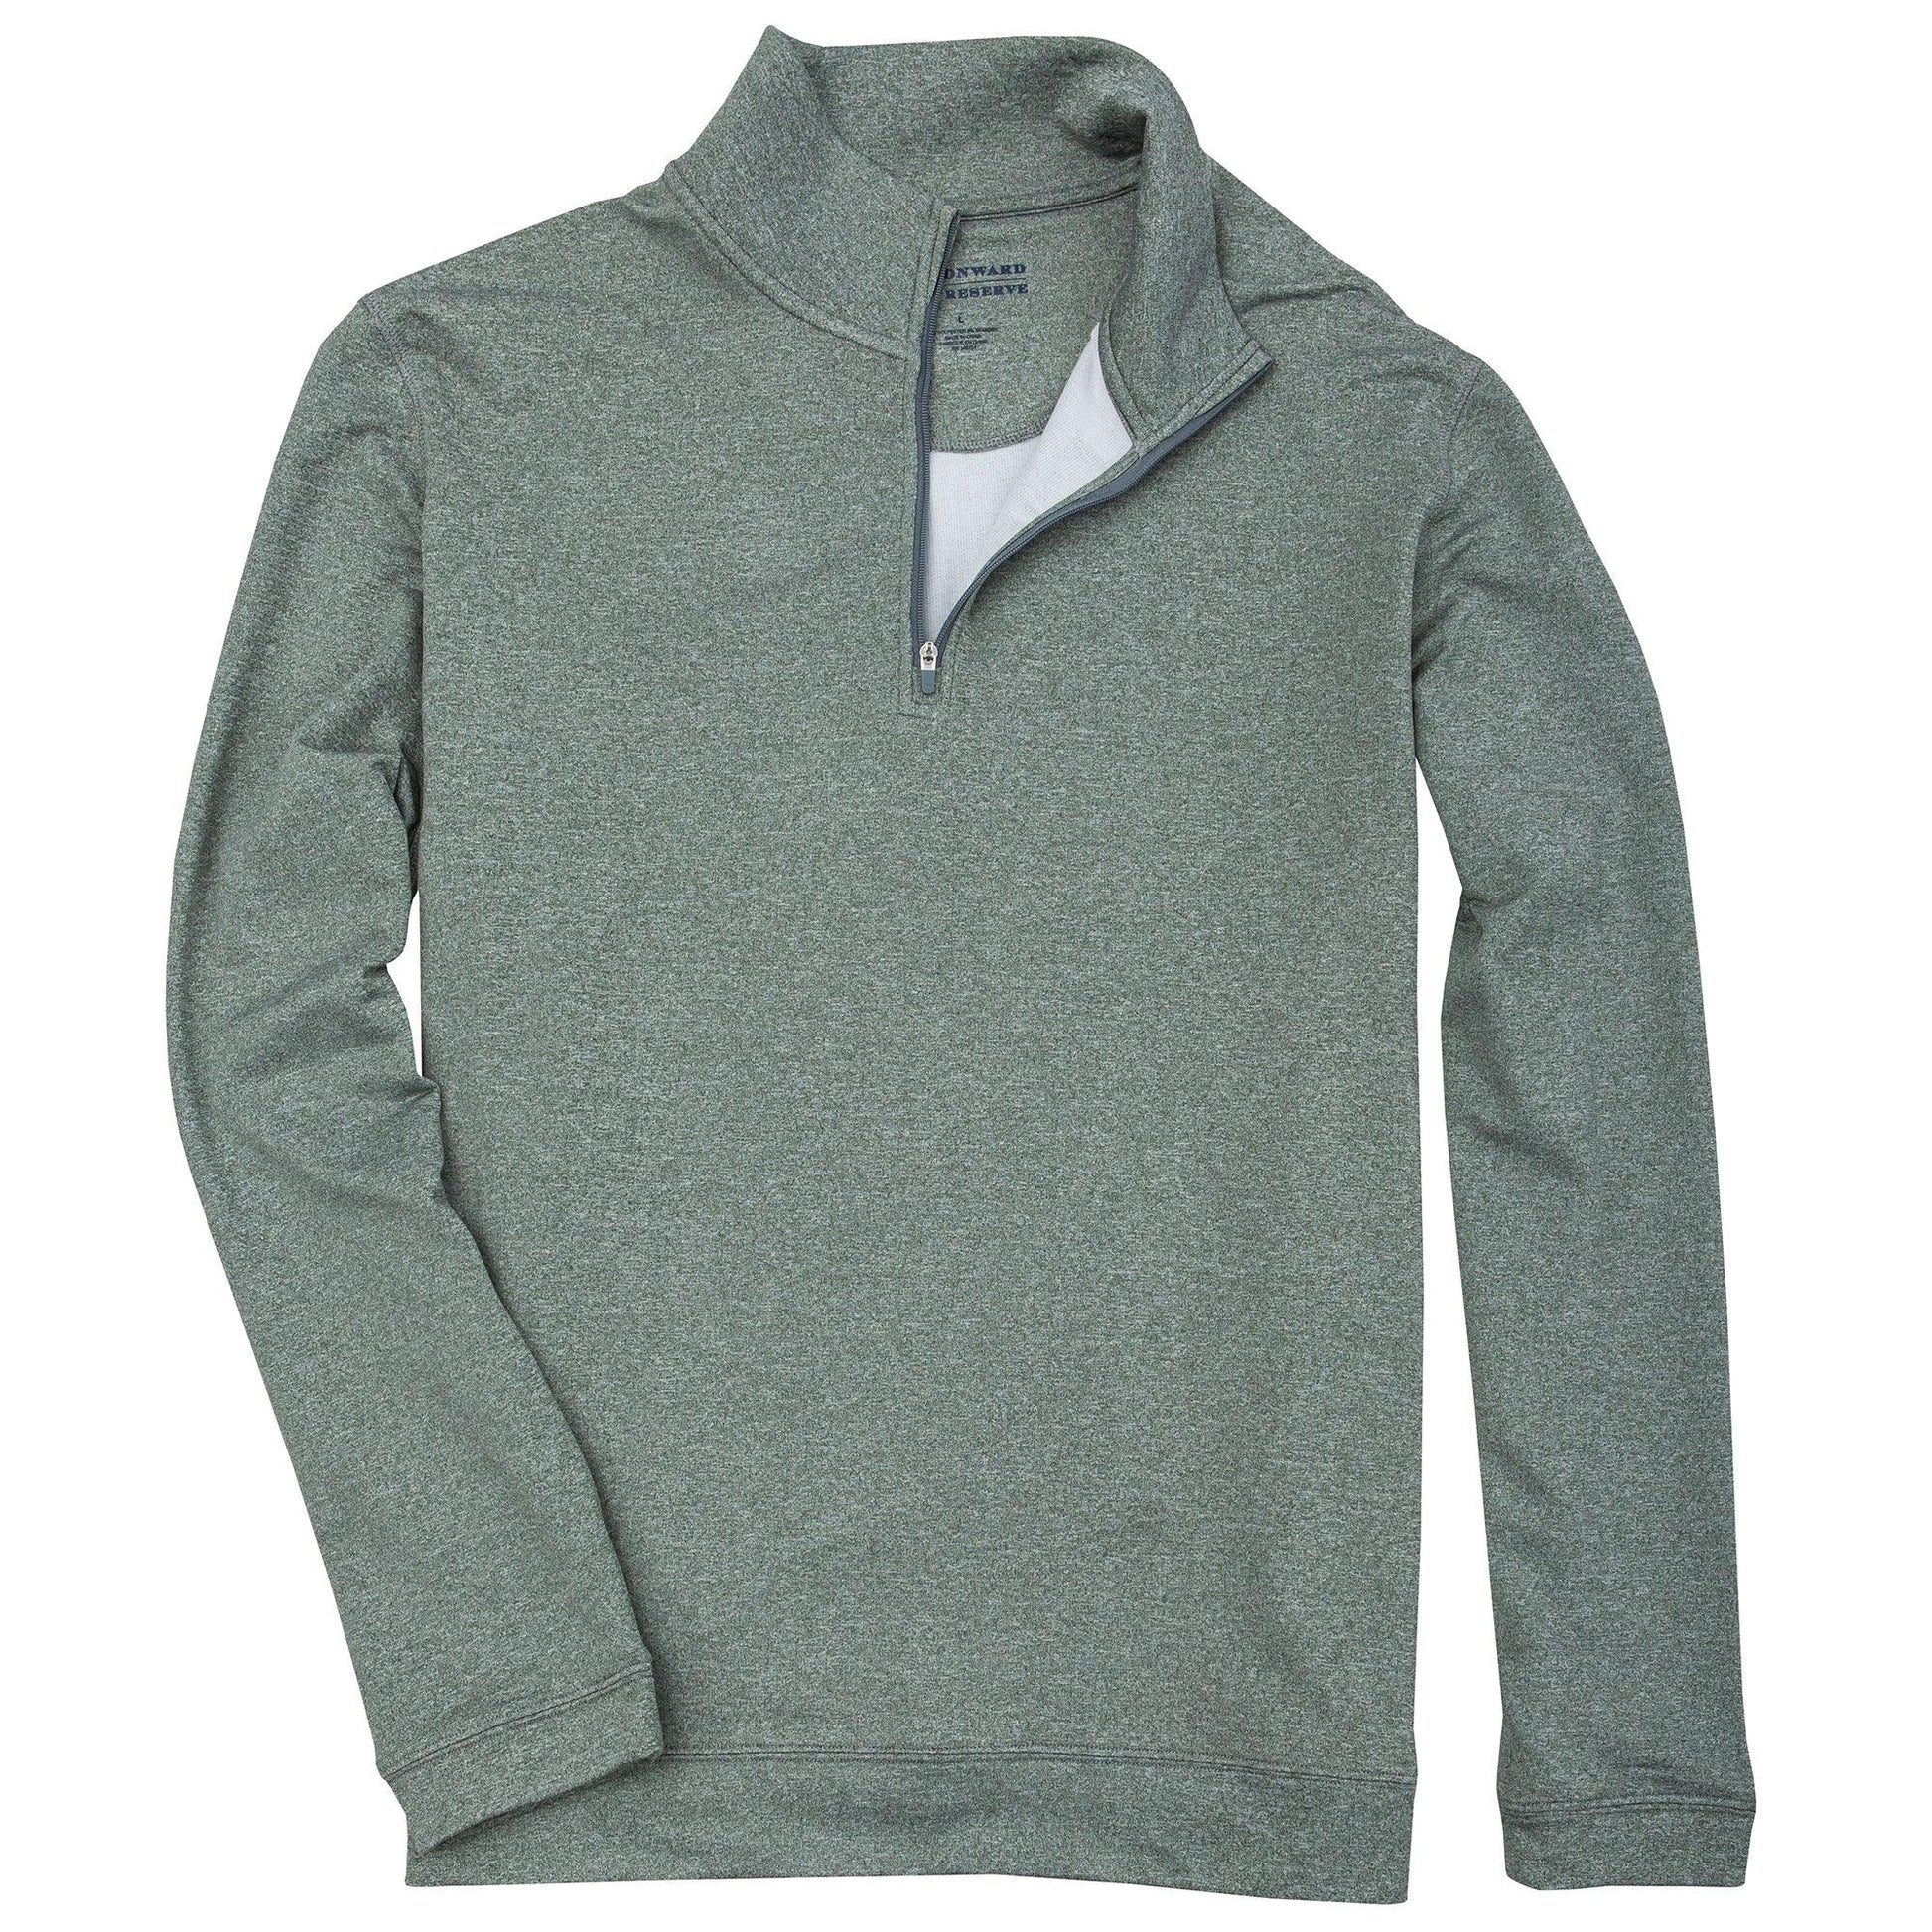 XERSION performance 1/4 zip pullover  1/4 zip pullover, Pullover, Clothes  design